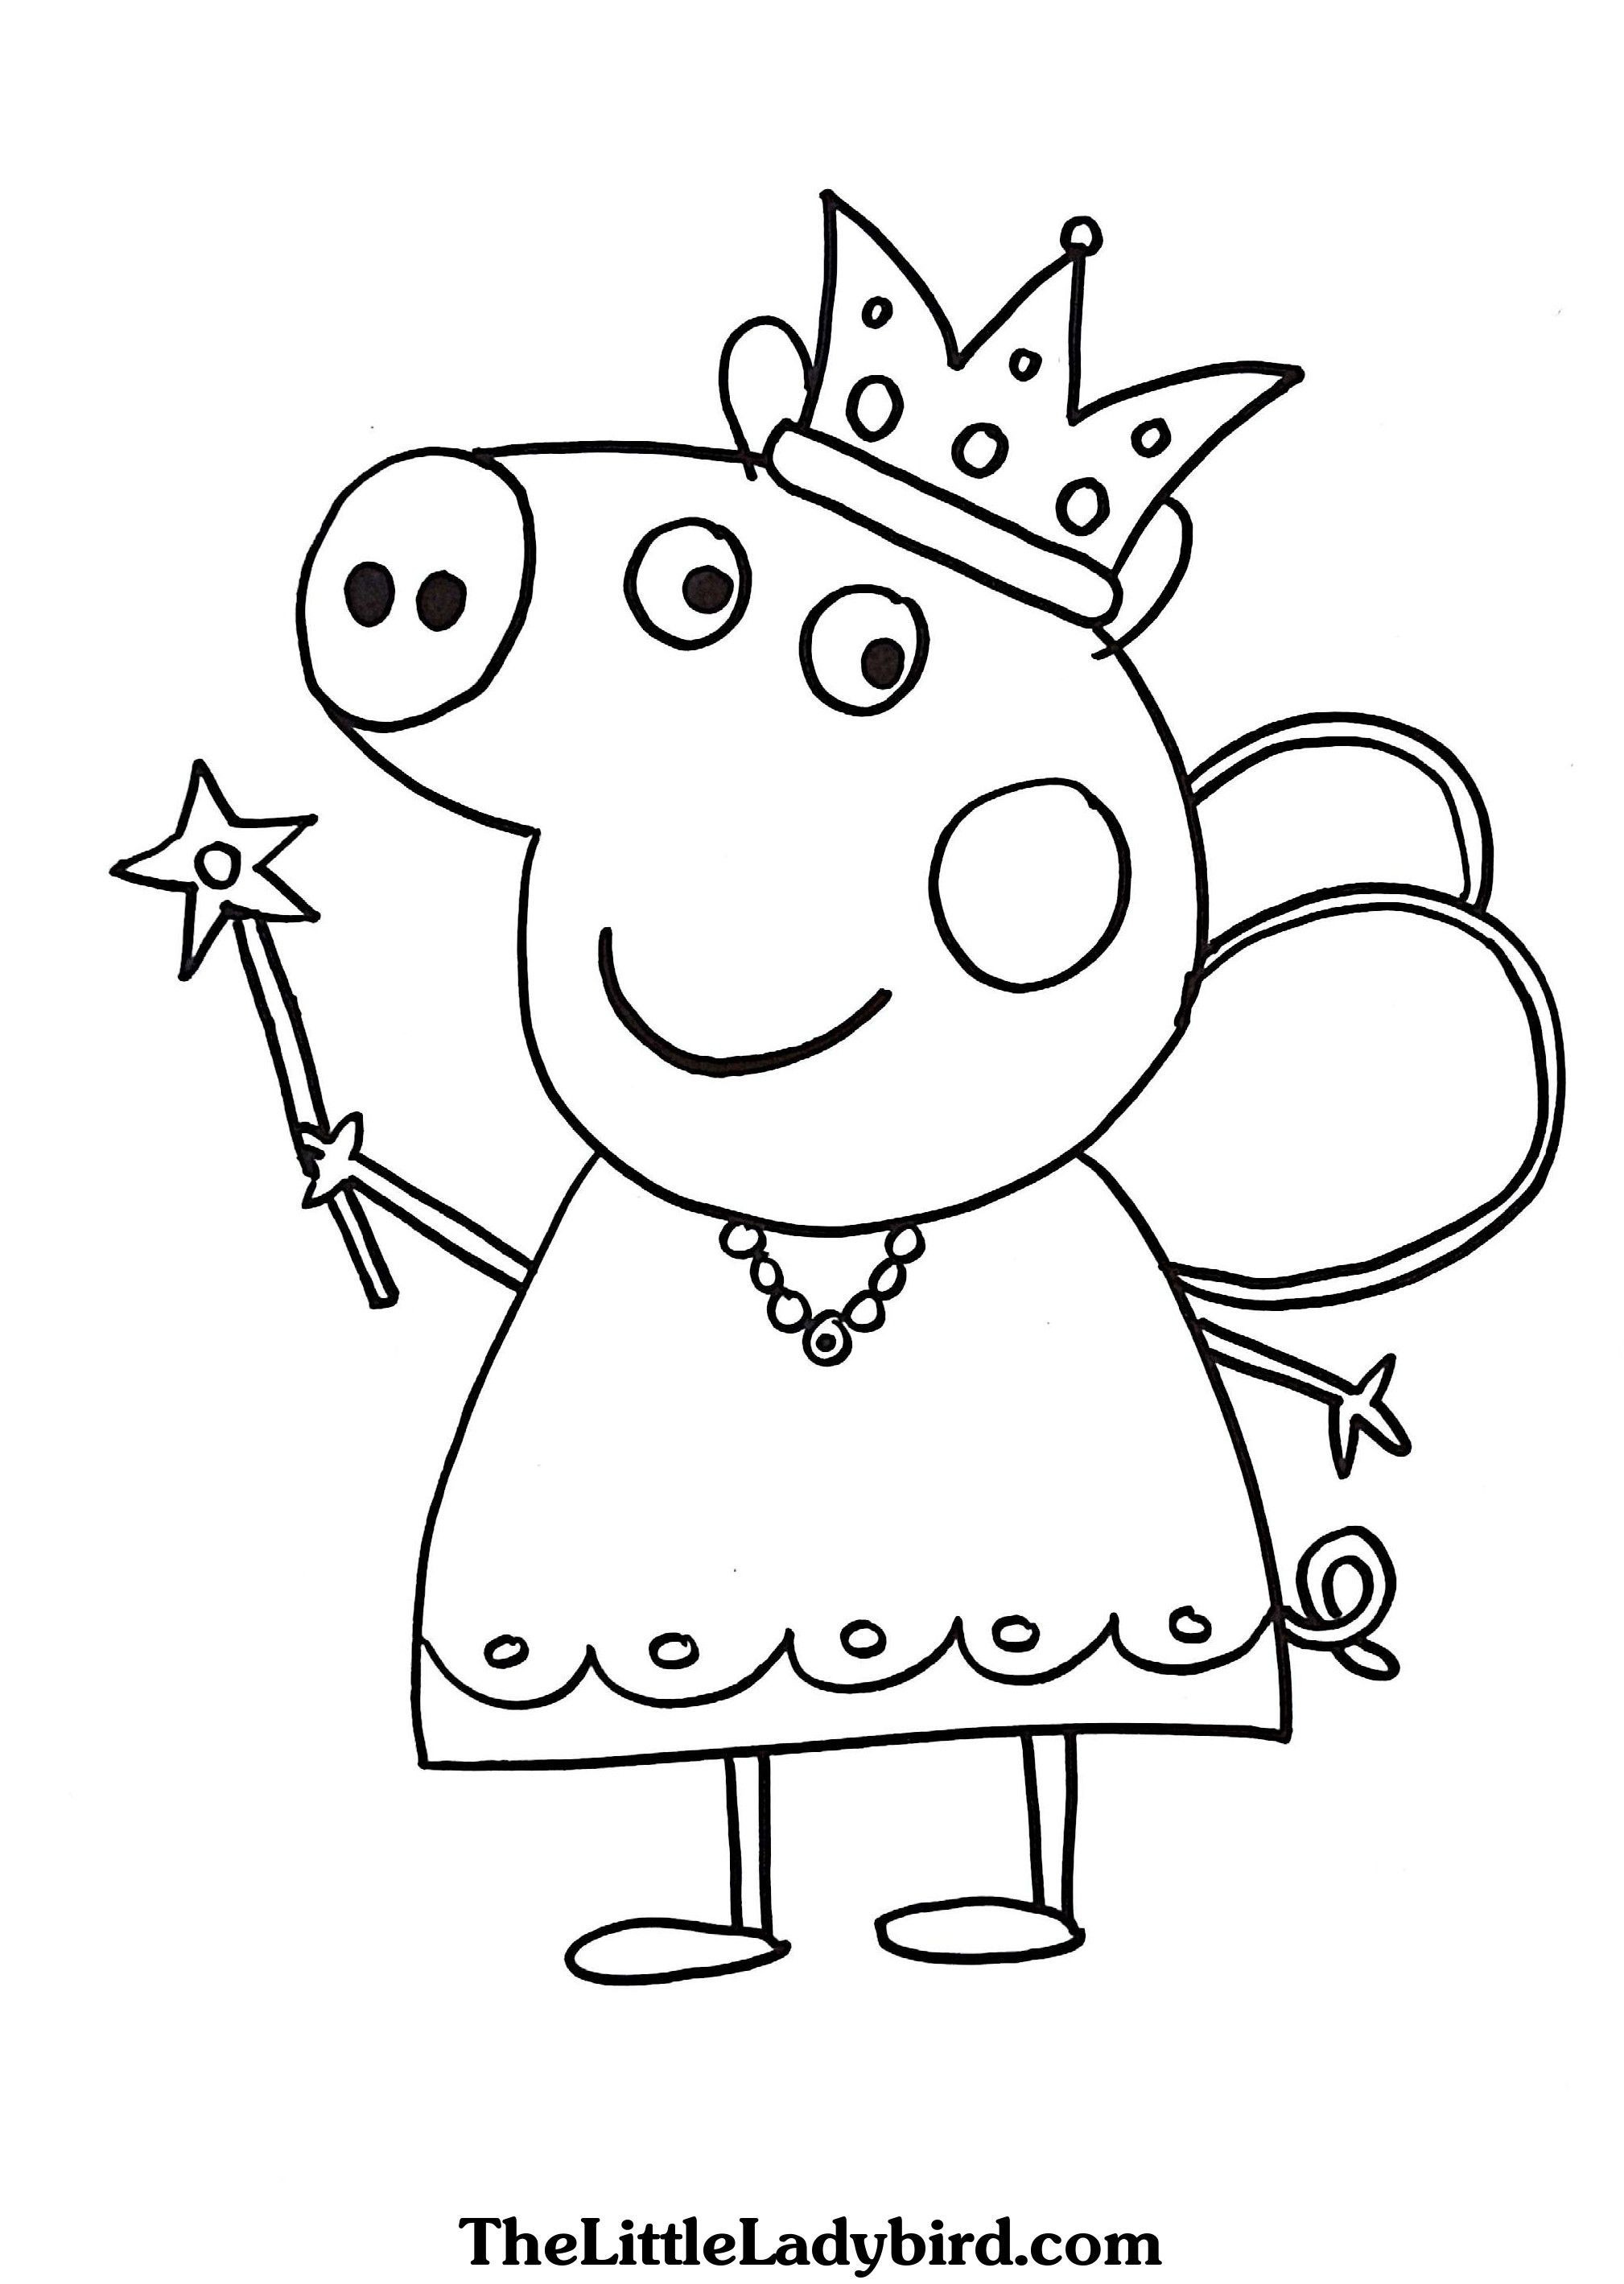 Peppa Pig Coloring Pages Inspirational Peppa Pig Coloring Game Fresh Coloring Pages Line Peppa Pig New